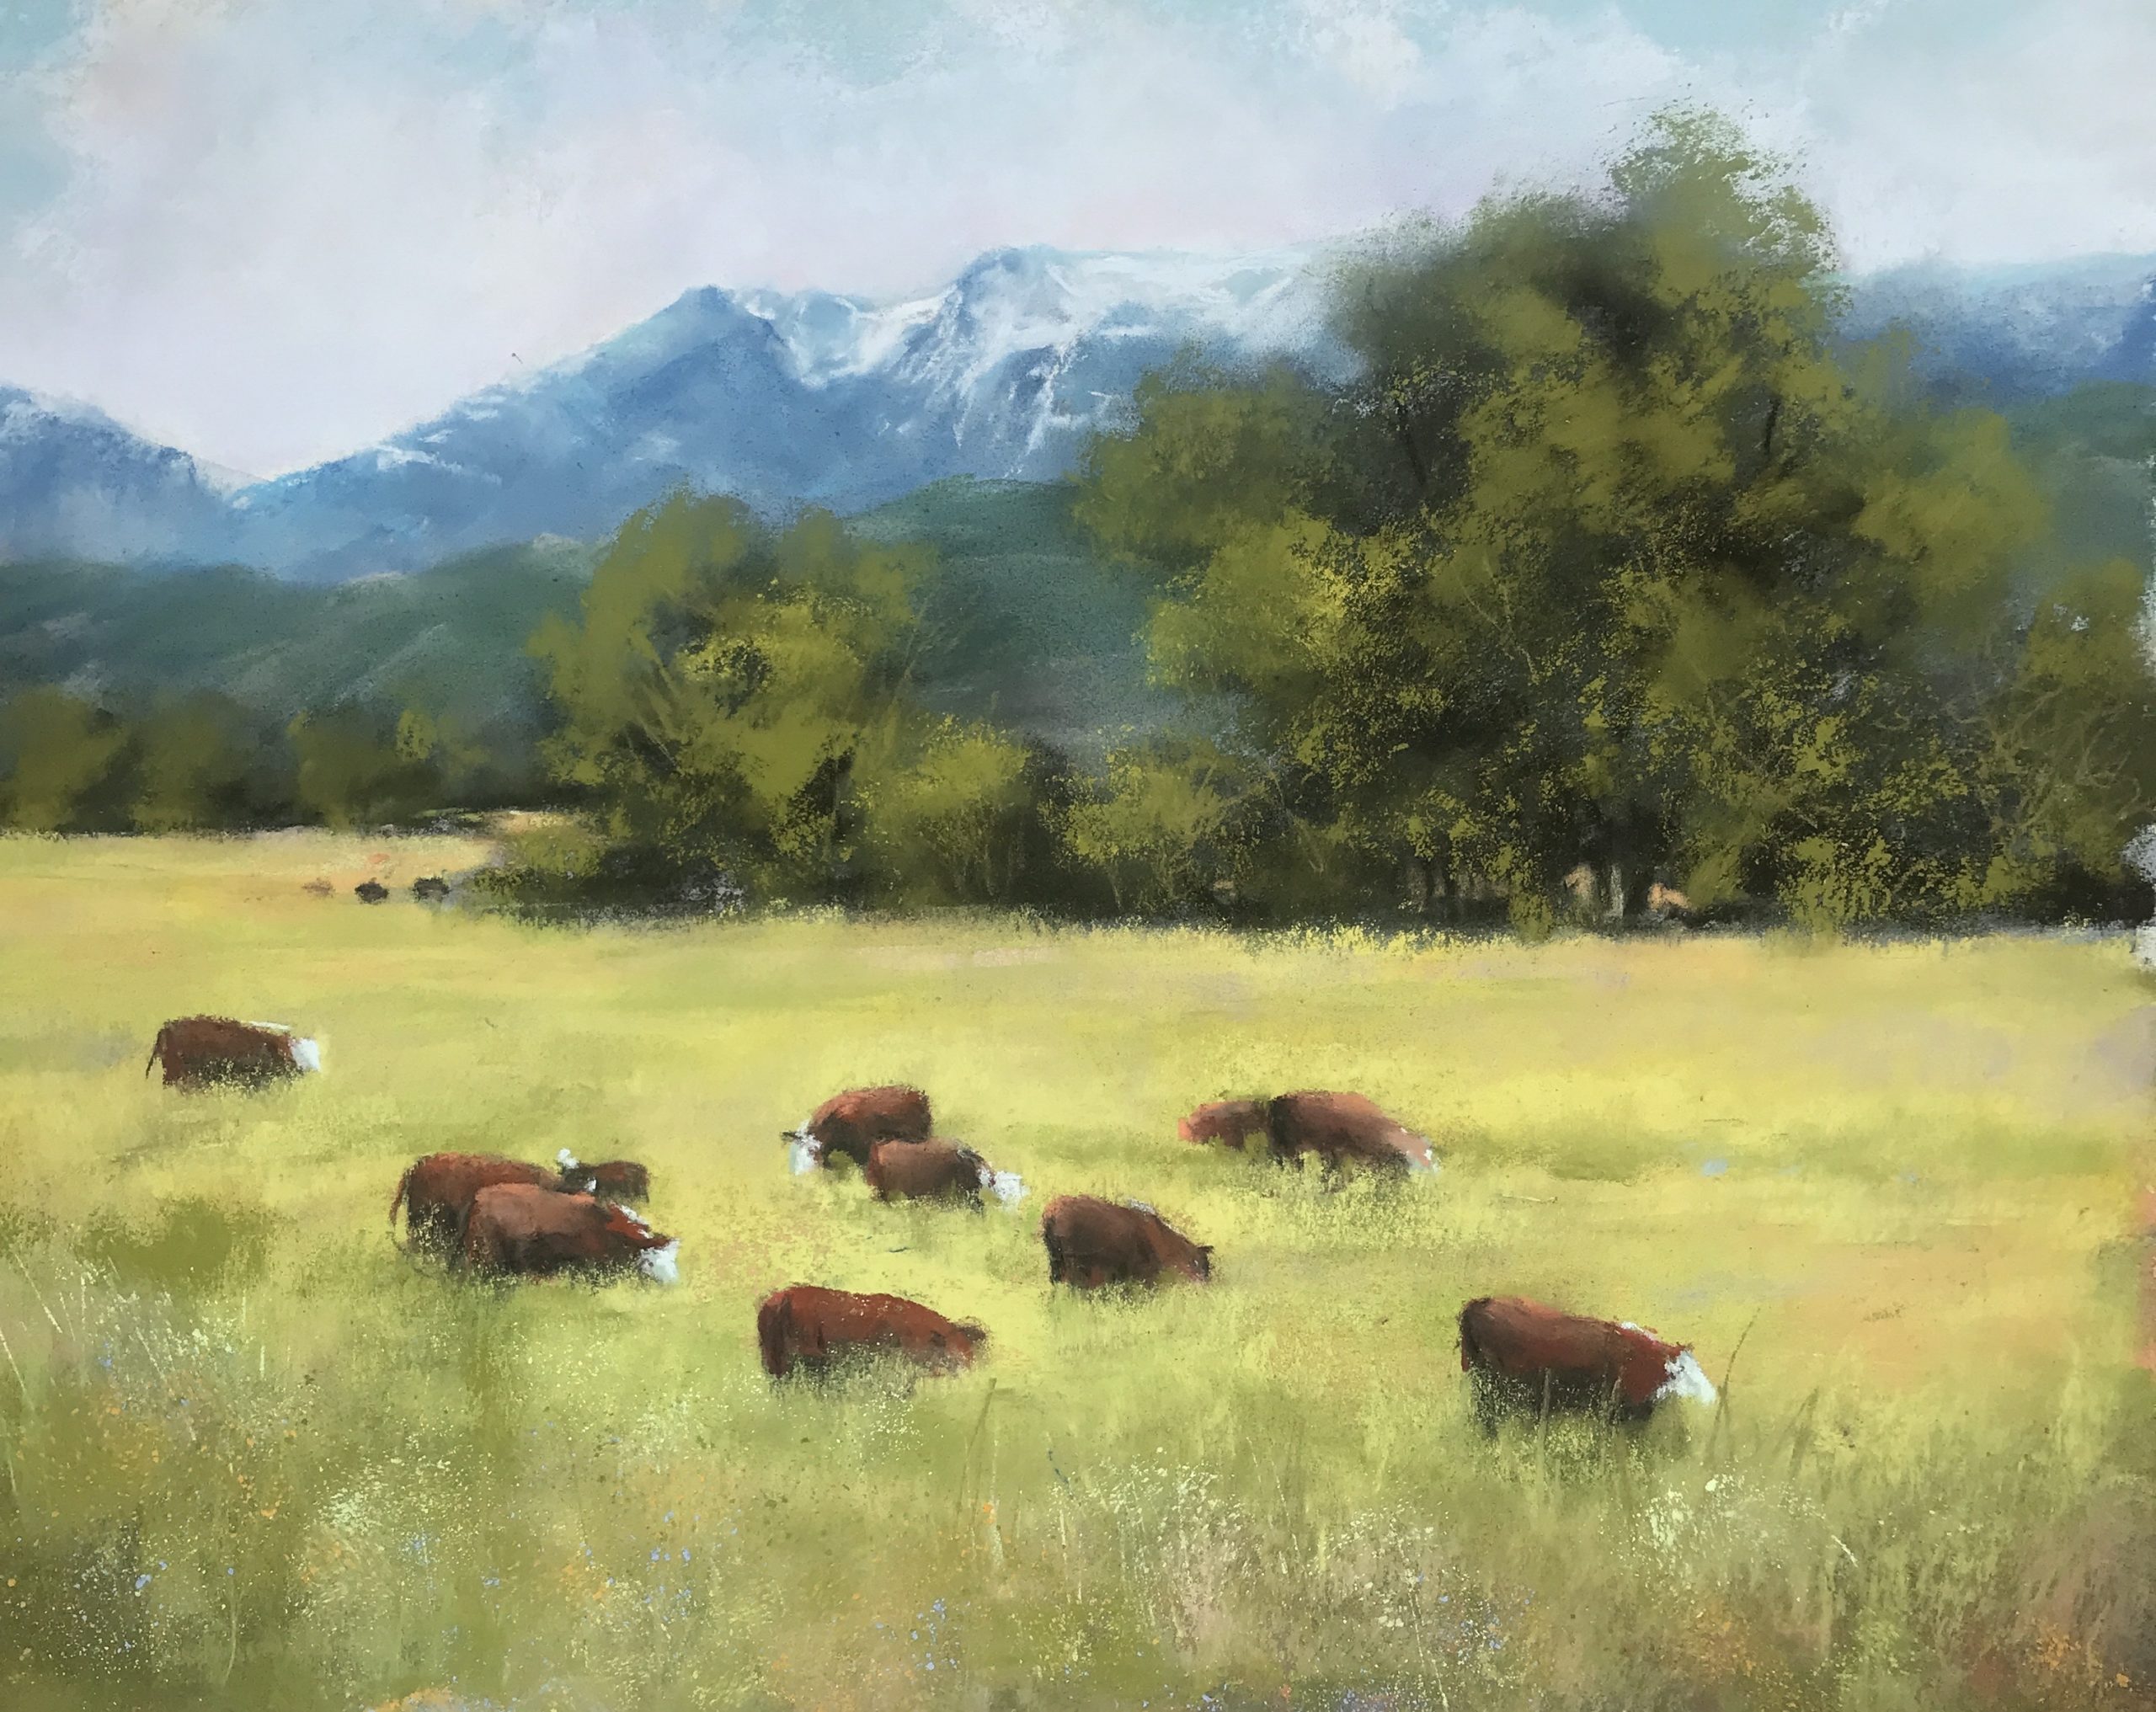 rural paintings - "Grazing" by Bonnie Zahn Griffith